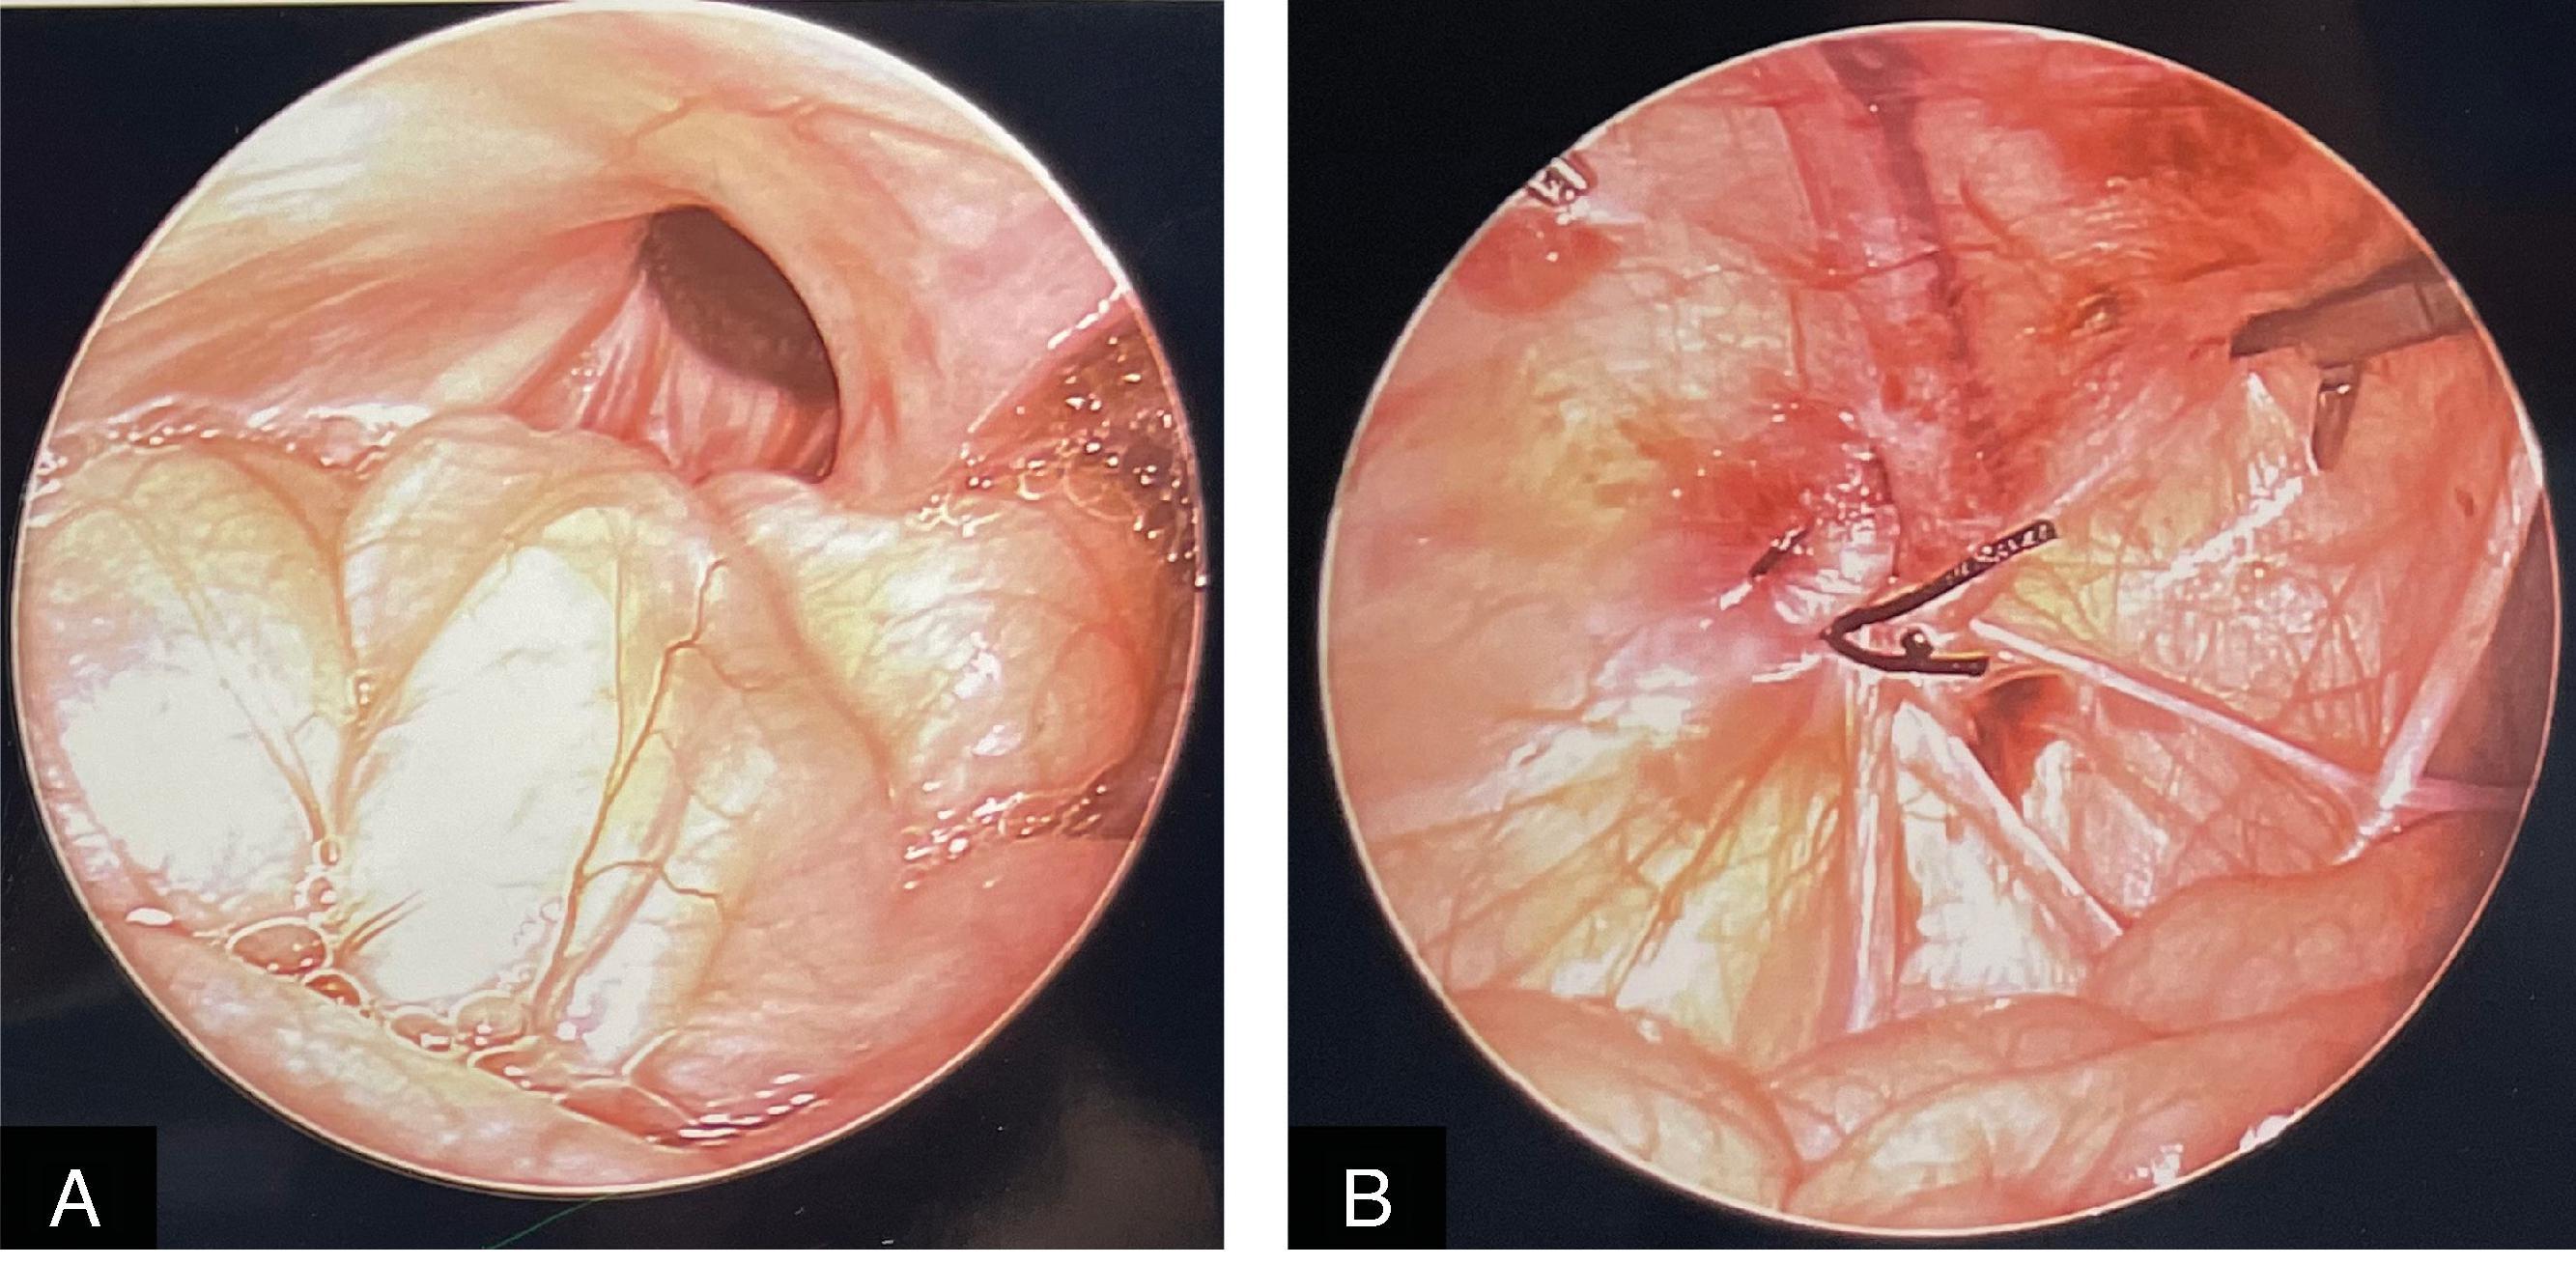 FIG. 3, Intraoperative photographs before (A) and after (B) laparoscopic inguinal hernia repair by ligation of the left internal inguinal ring in an infant.